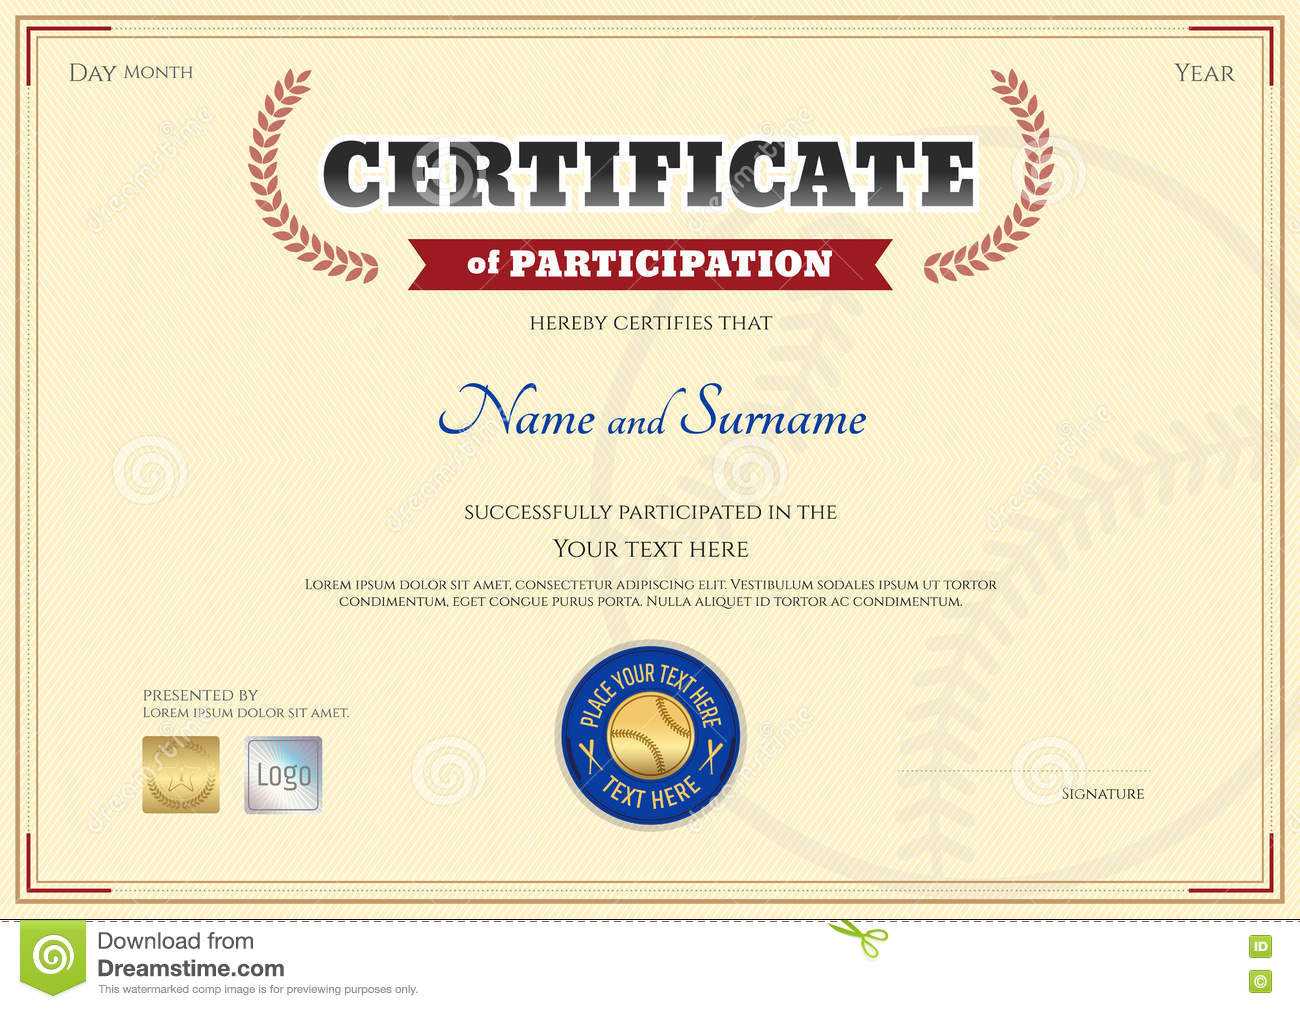 Certificate Of Participation Template In Baseball Sport Regarding Certification Of Participation Free Template